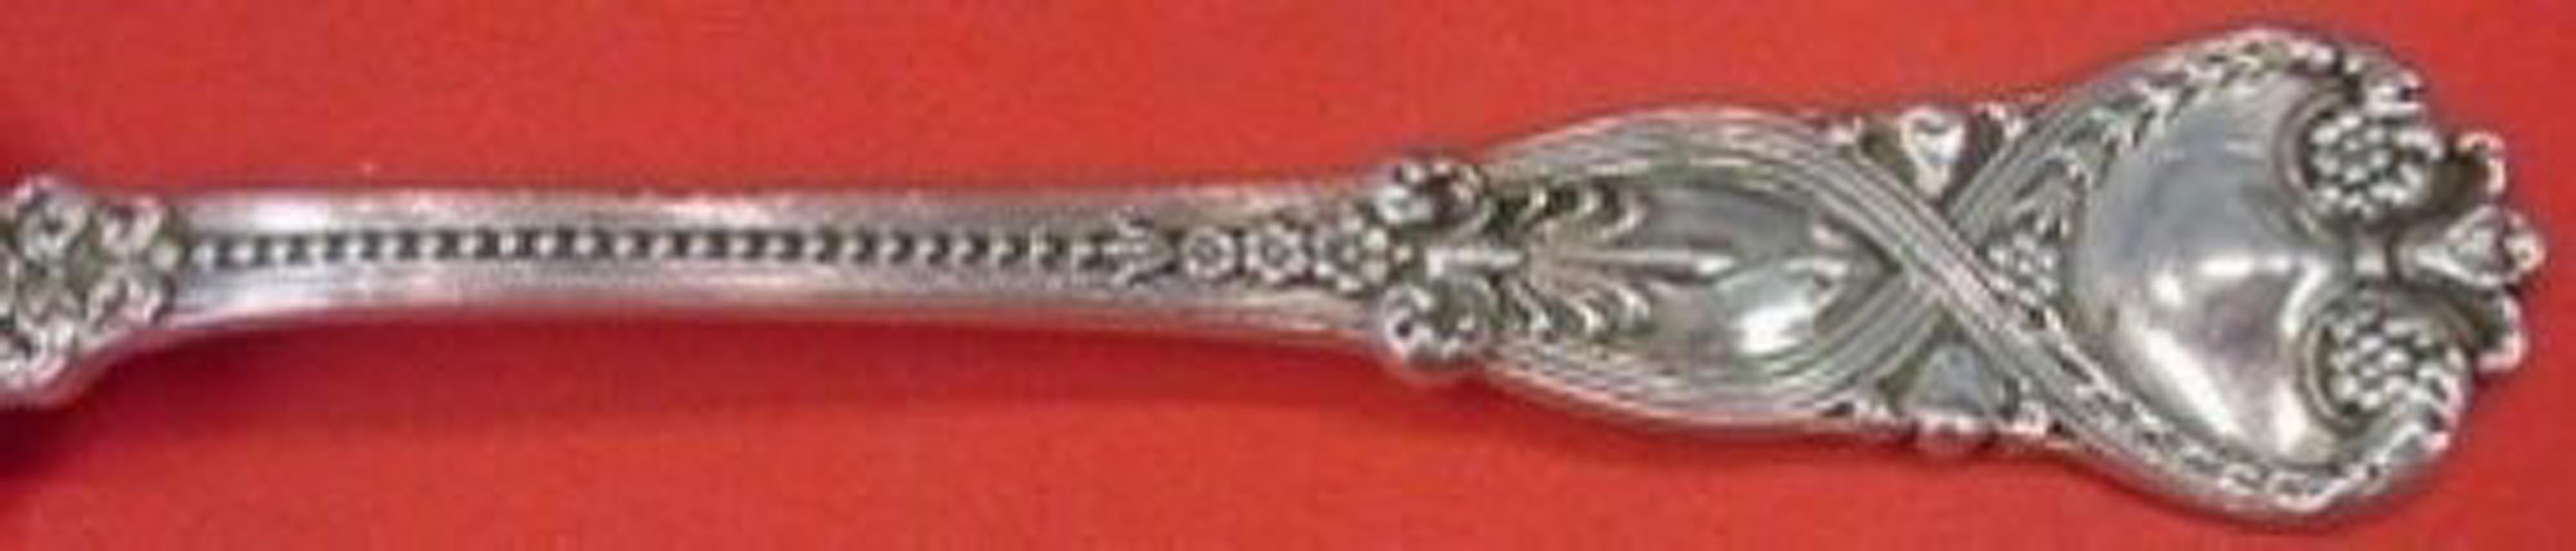 Sterling silver serving spoon 8 1/2